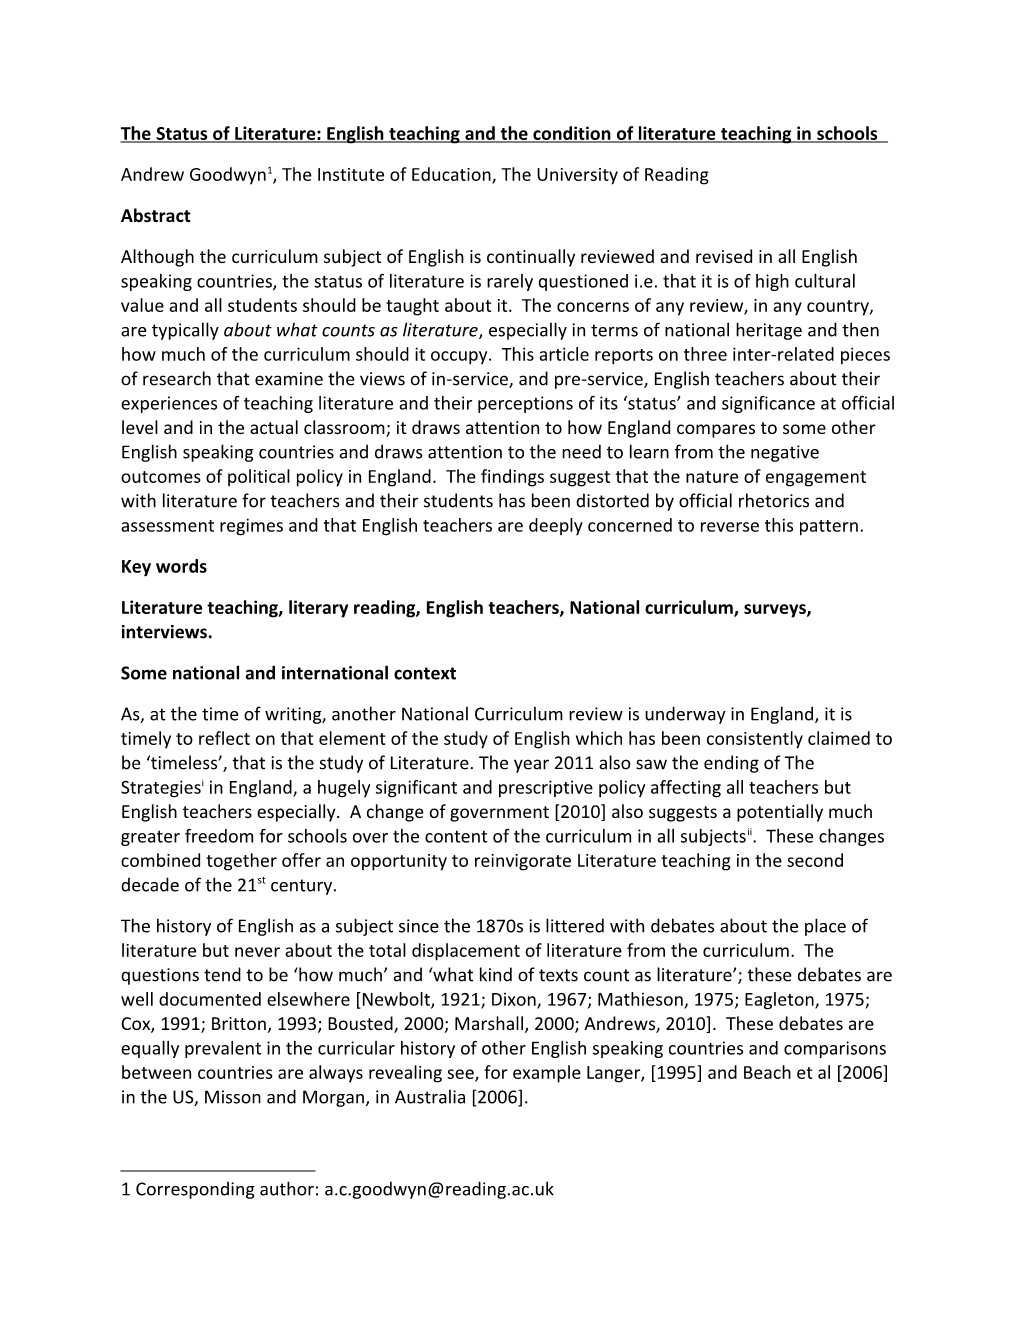 The Condition of Literature: English Teaching and the Status of Literature in Schools 29-3-11